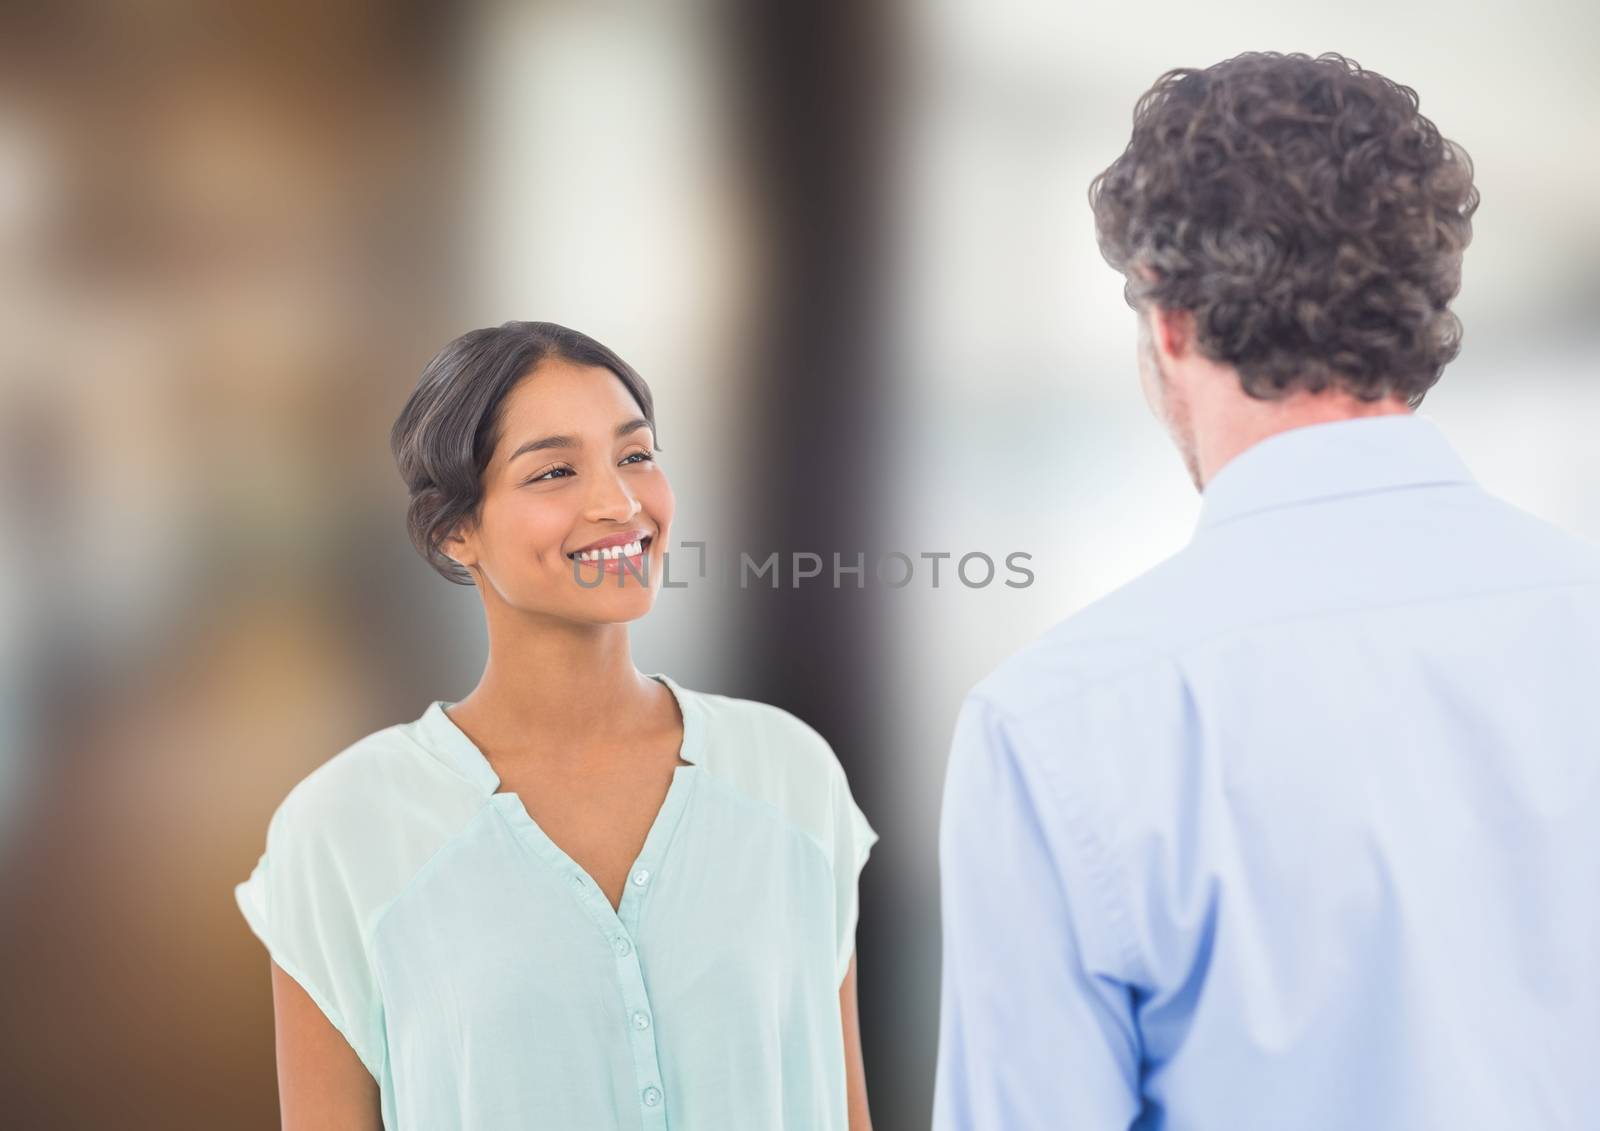 Digital composite of Two people talking to each other